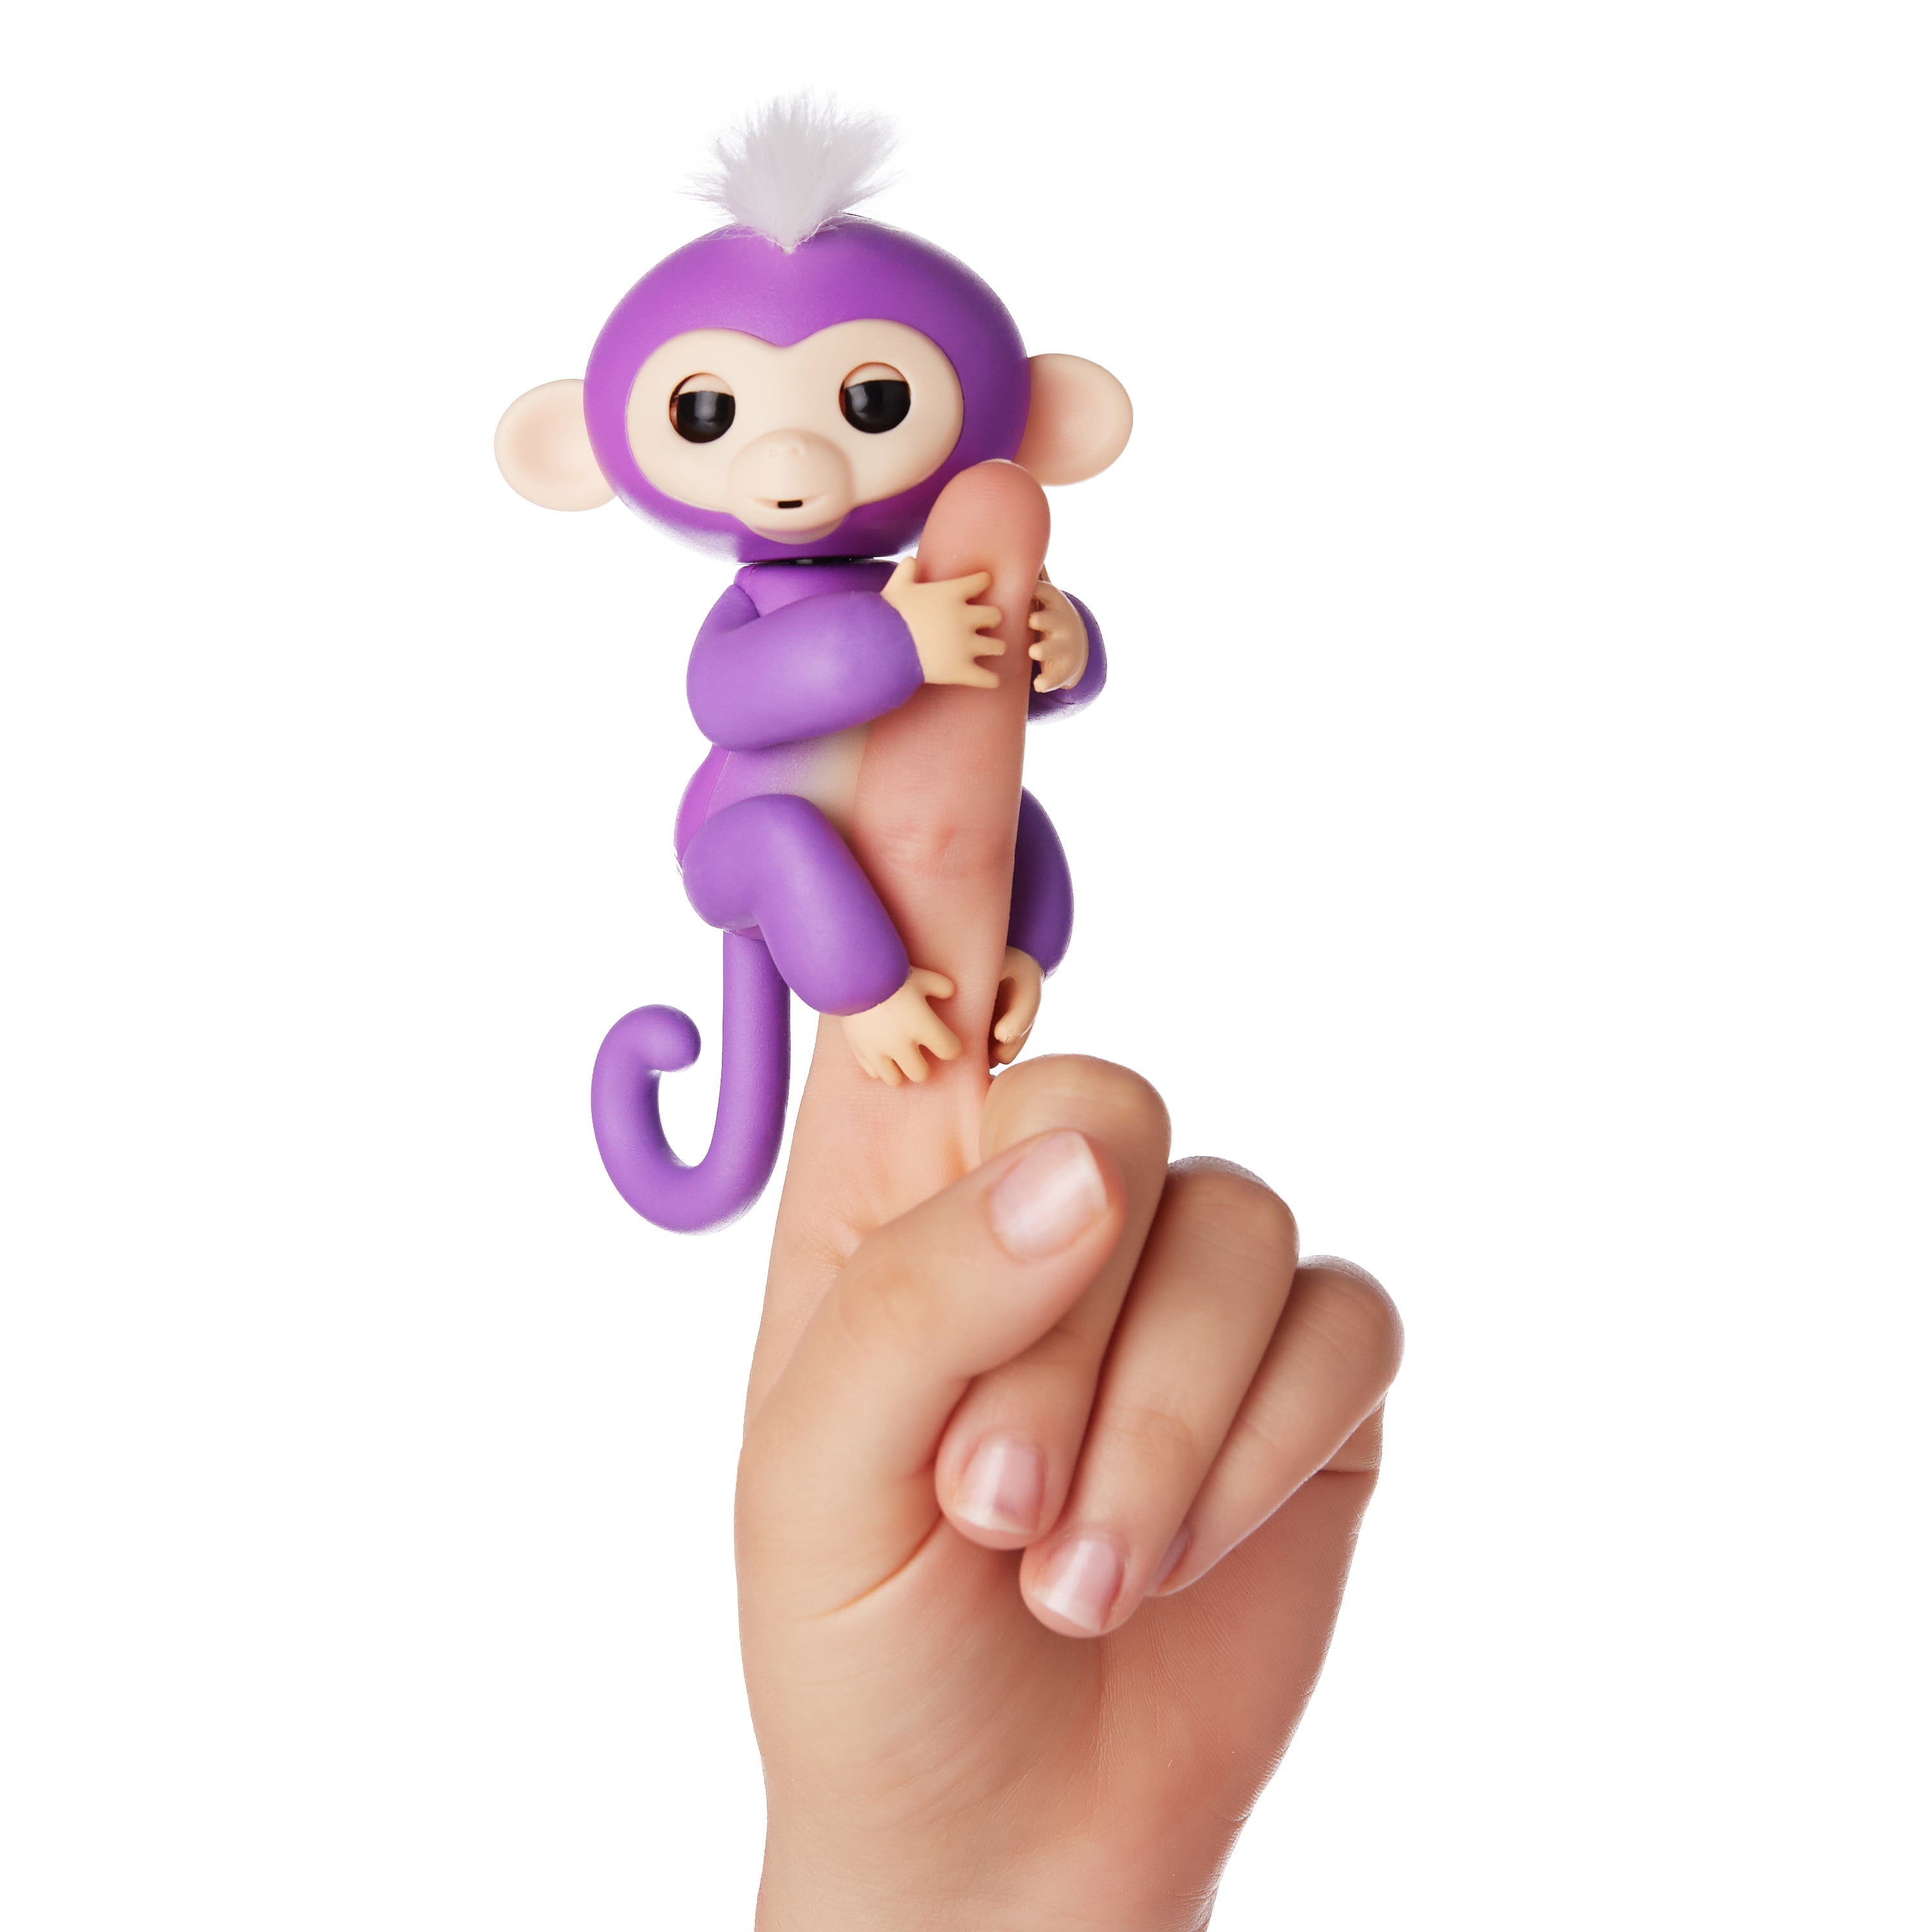 Details about   Fingerlings Christmas Holiday INTERACTIVE  with kids 3pc toy monkeys